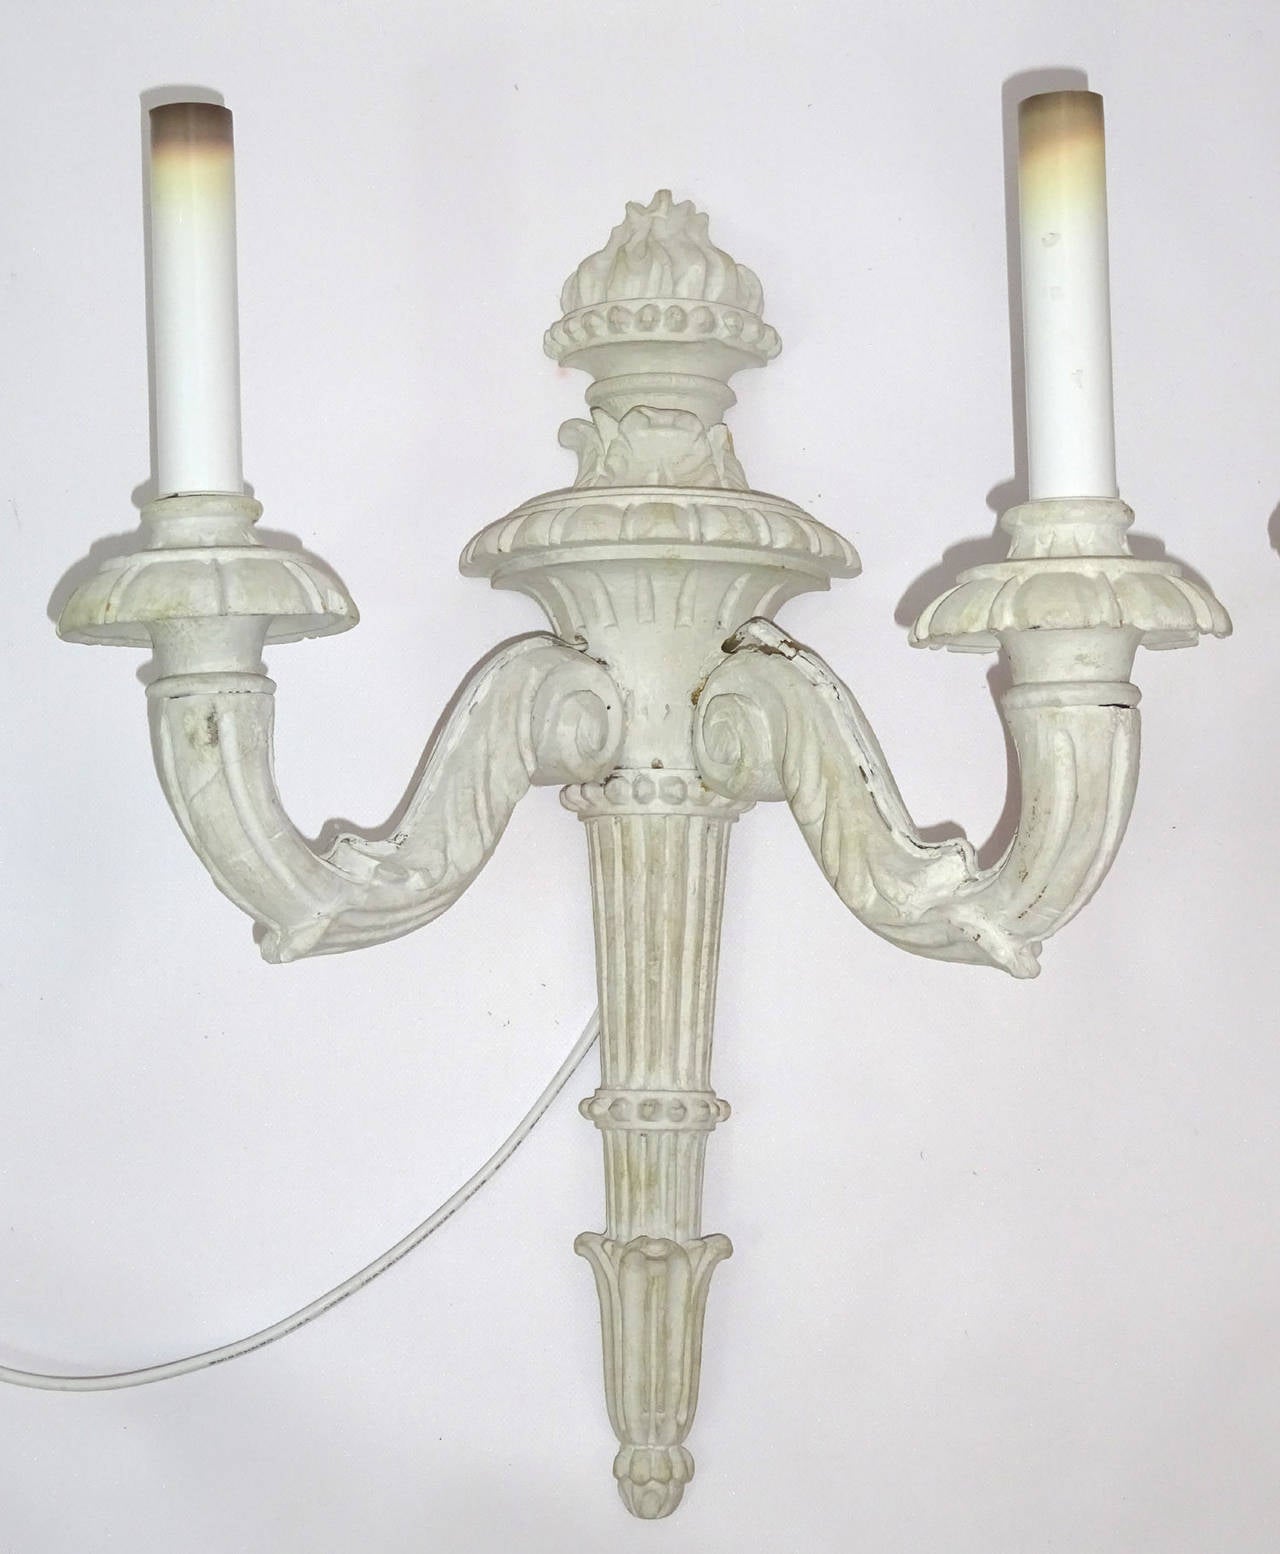 Pair of early 20th century Italian hand-carved two-arm wall sconce in a distressed white painted finish and wired for electricity.